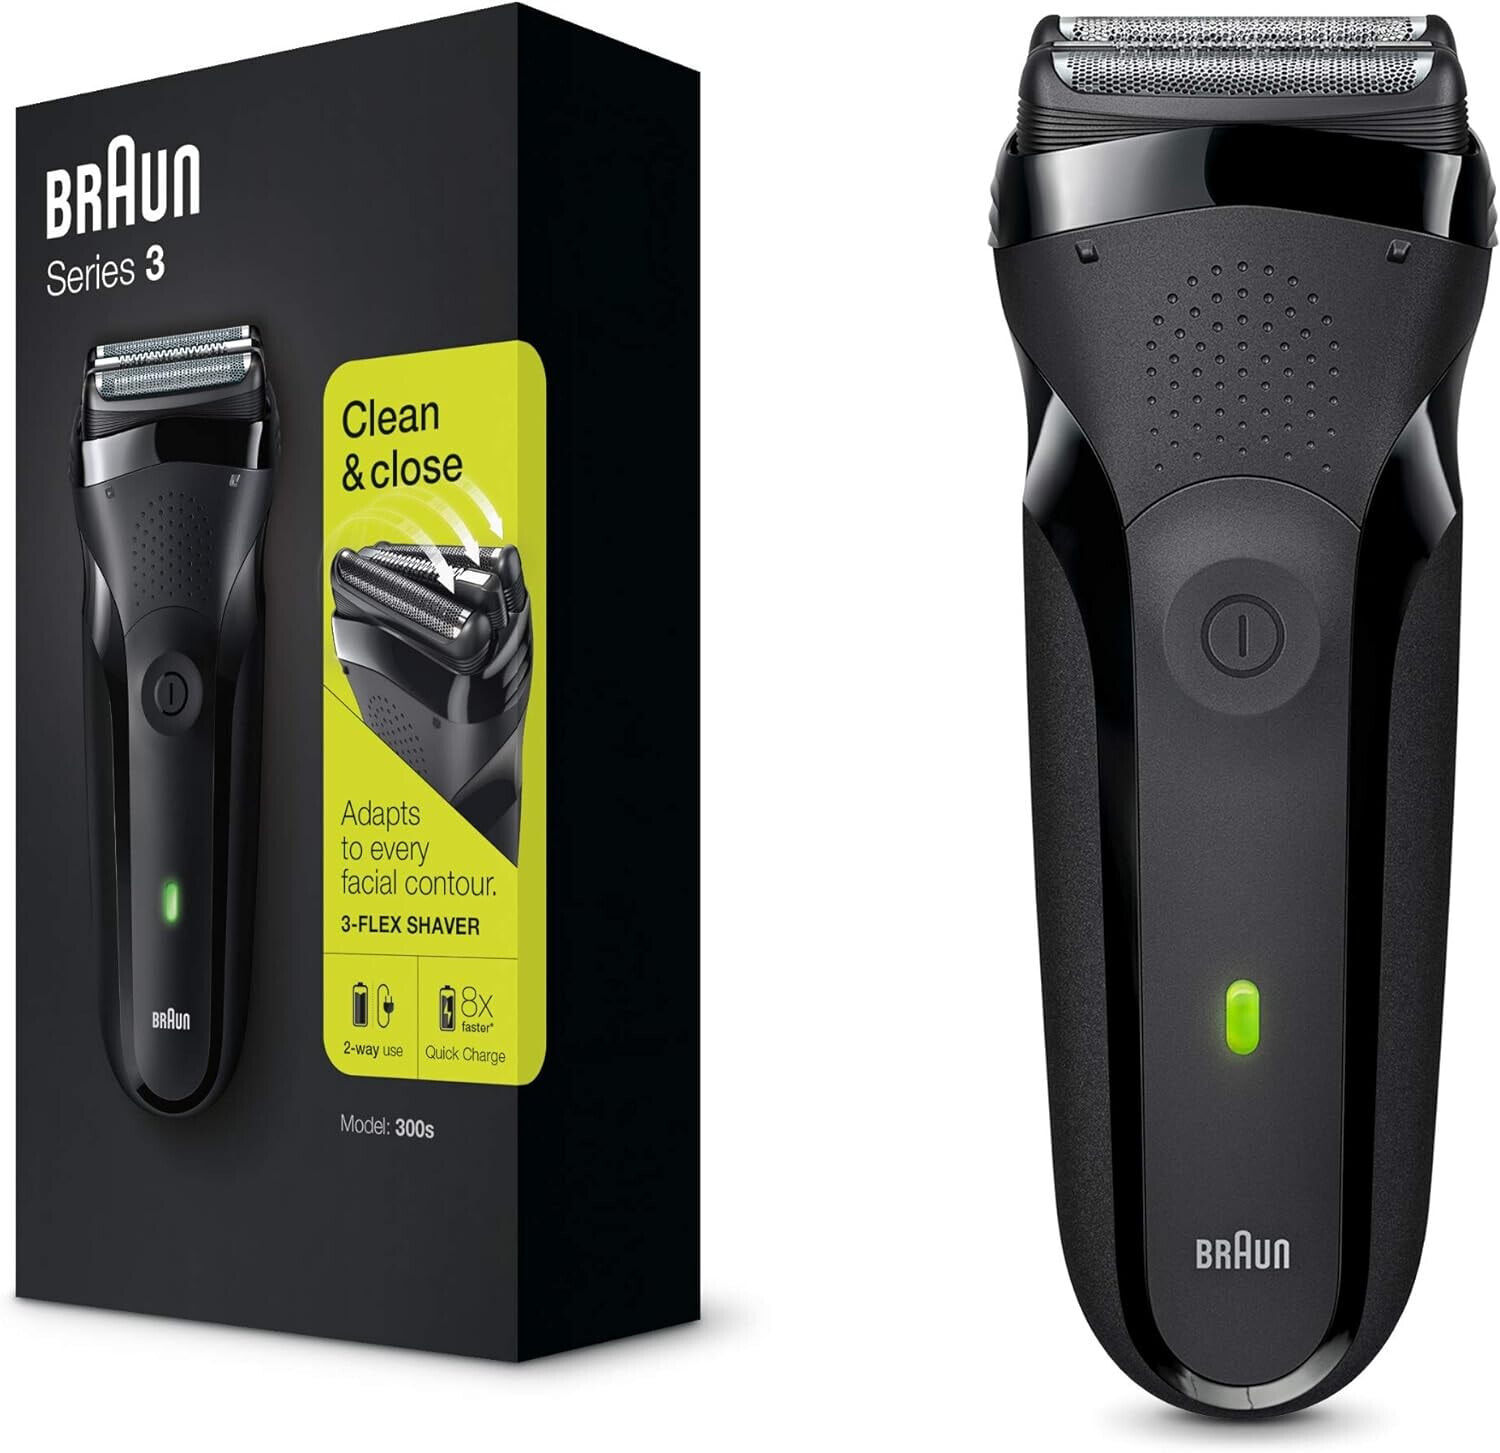 Braun Series 3 Men's Electric Shaver with 3 Flexible Blades, Rechargeable and Wireless Electric Shaver, 30 Minutes Runtime, Gift Man, 300s, Black